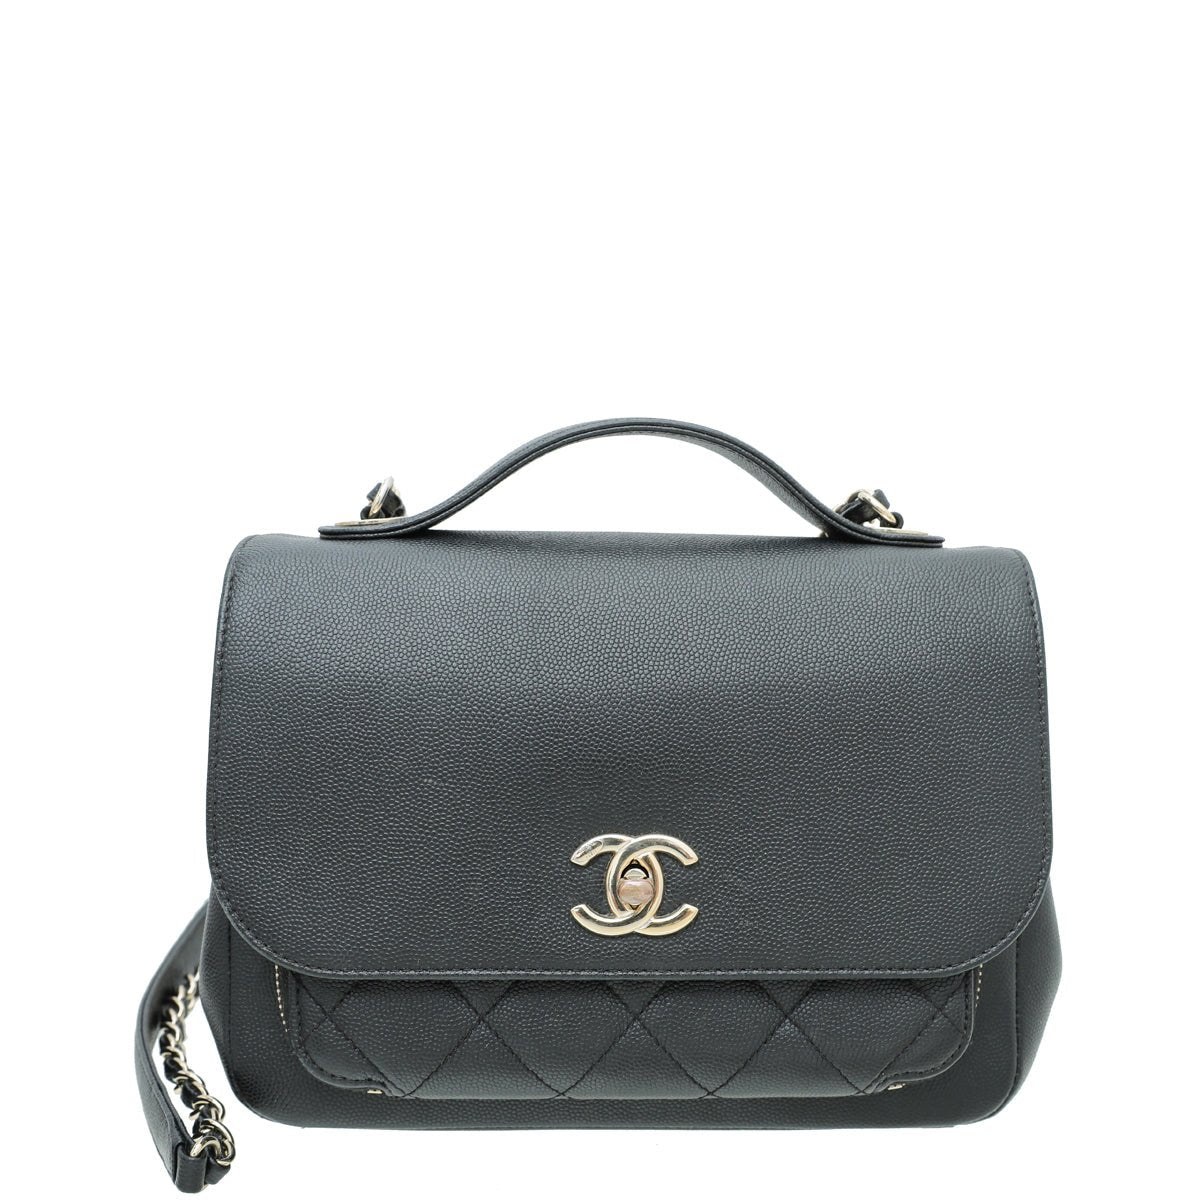 Chanel - Chanel Black CC Business Affinity Small Bag | The Closet